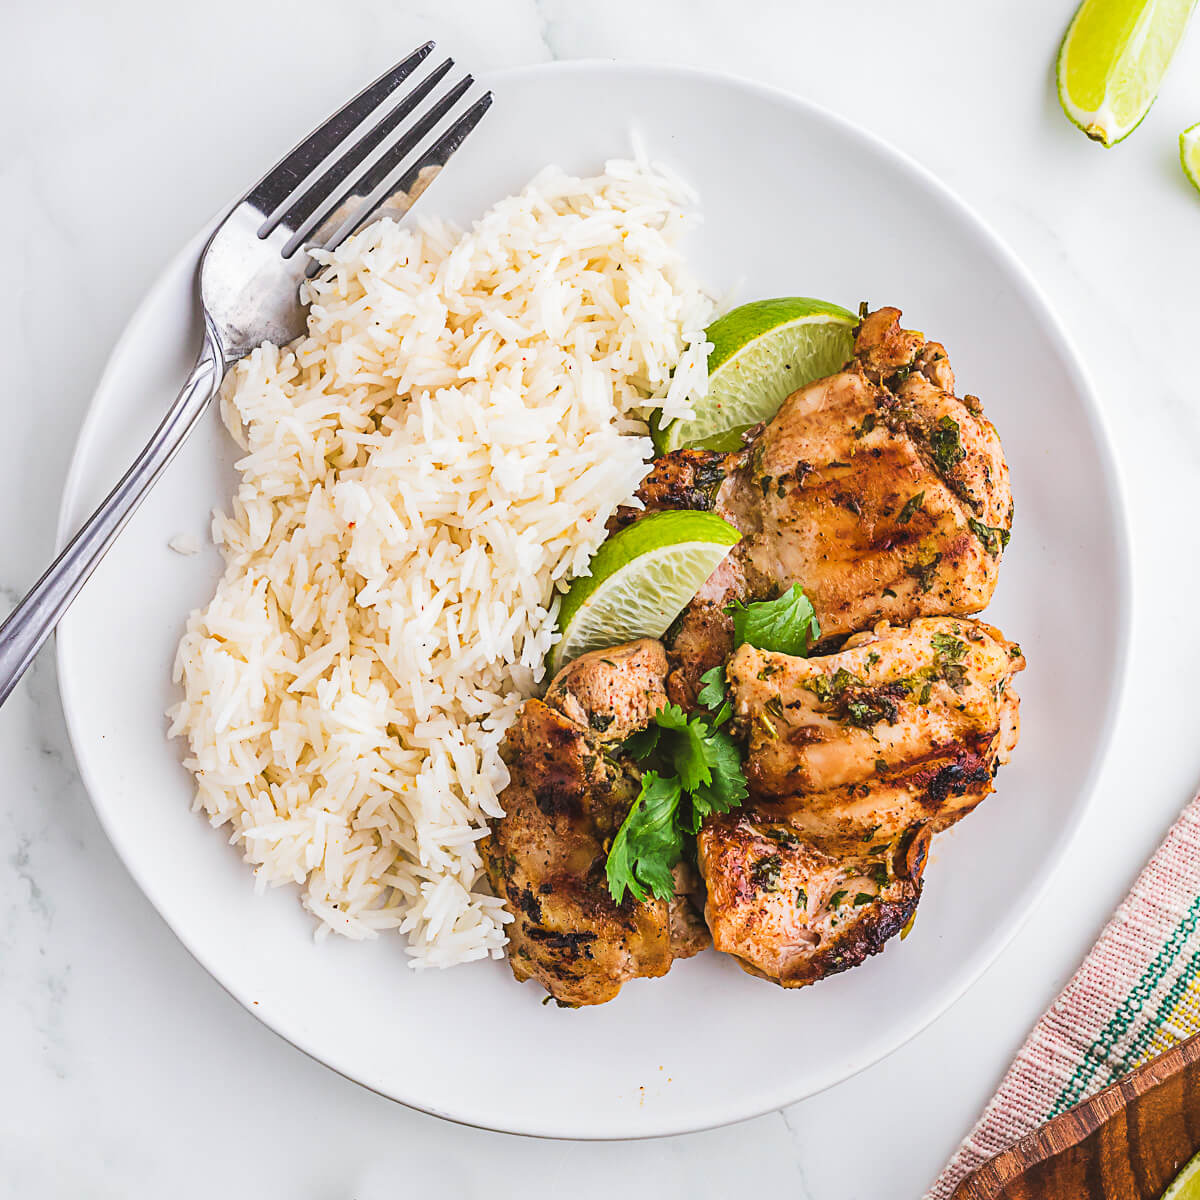 A plate of grilled chicken thighs garnished with cilantro and served with a side of white rice and lime wedges.